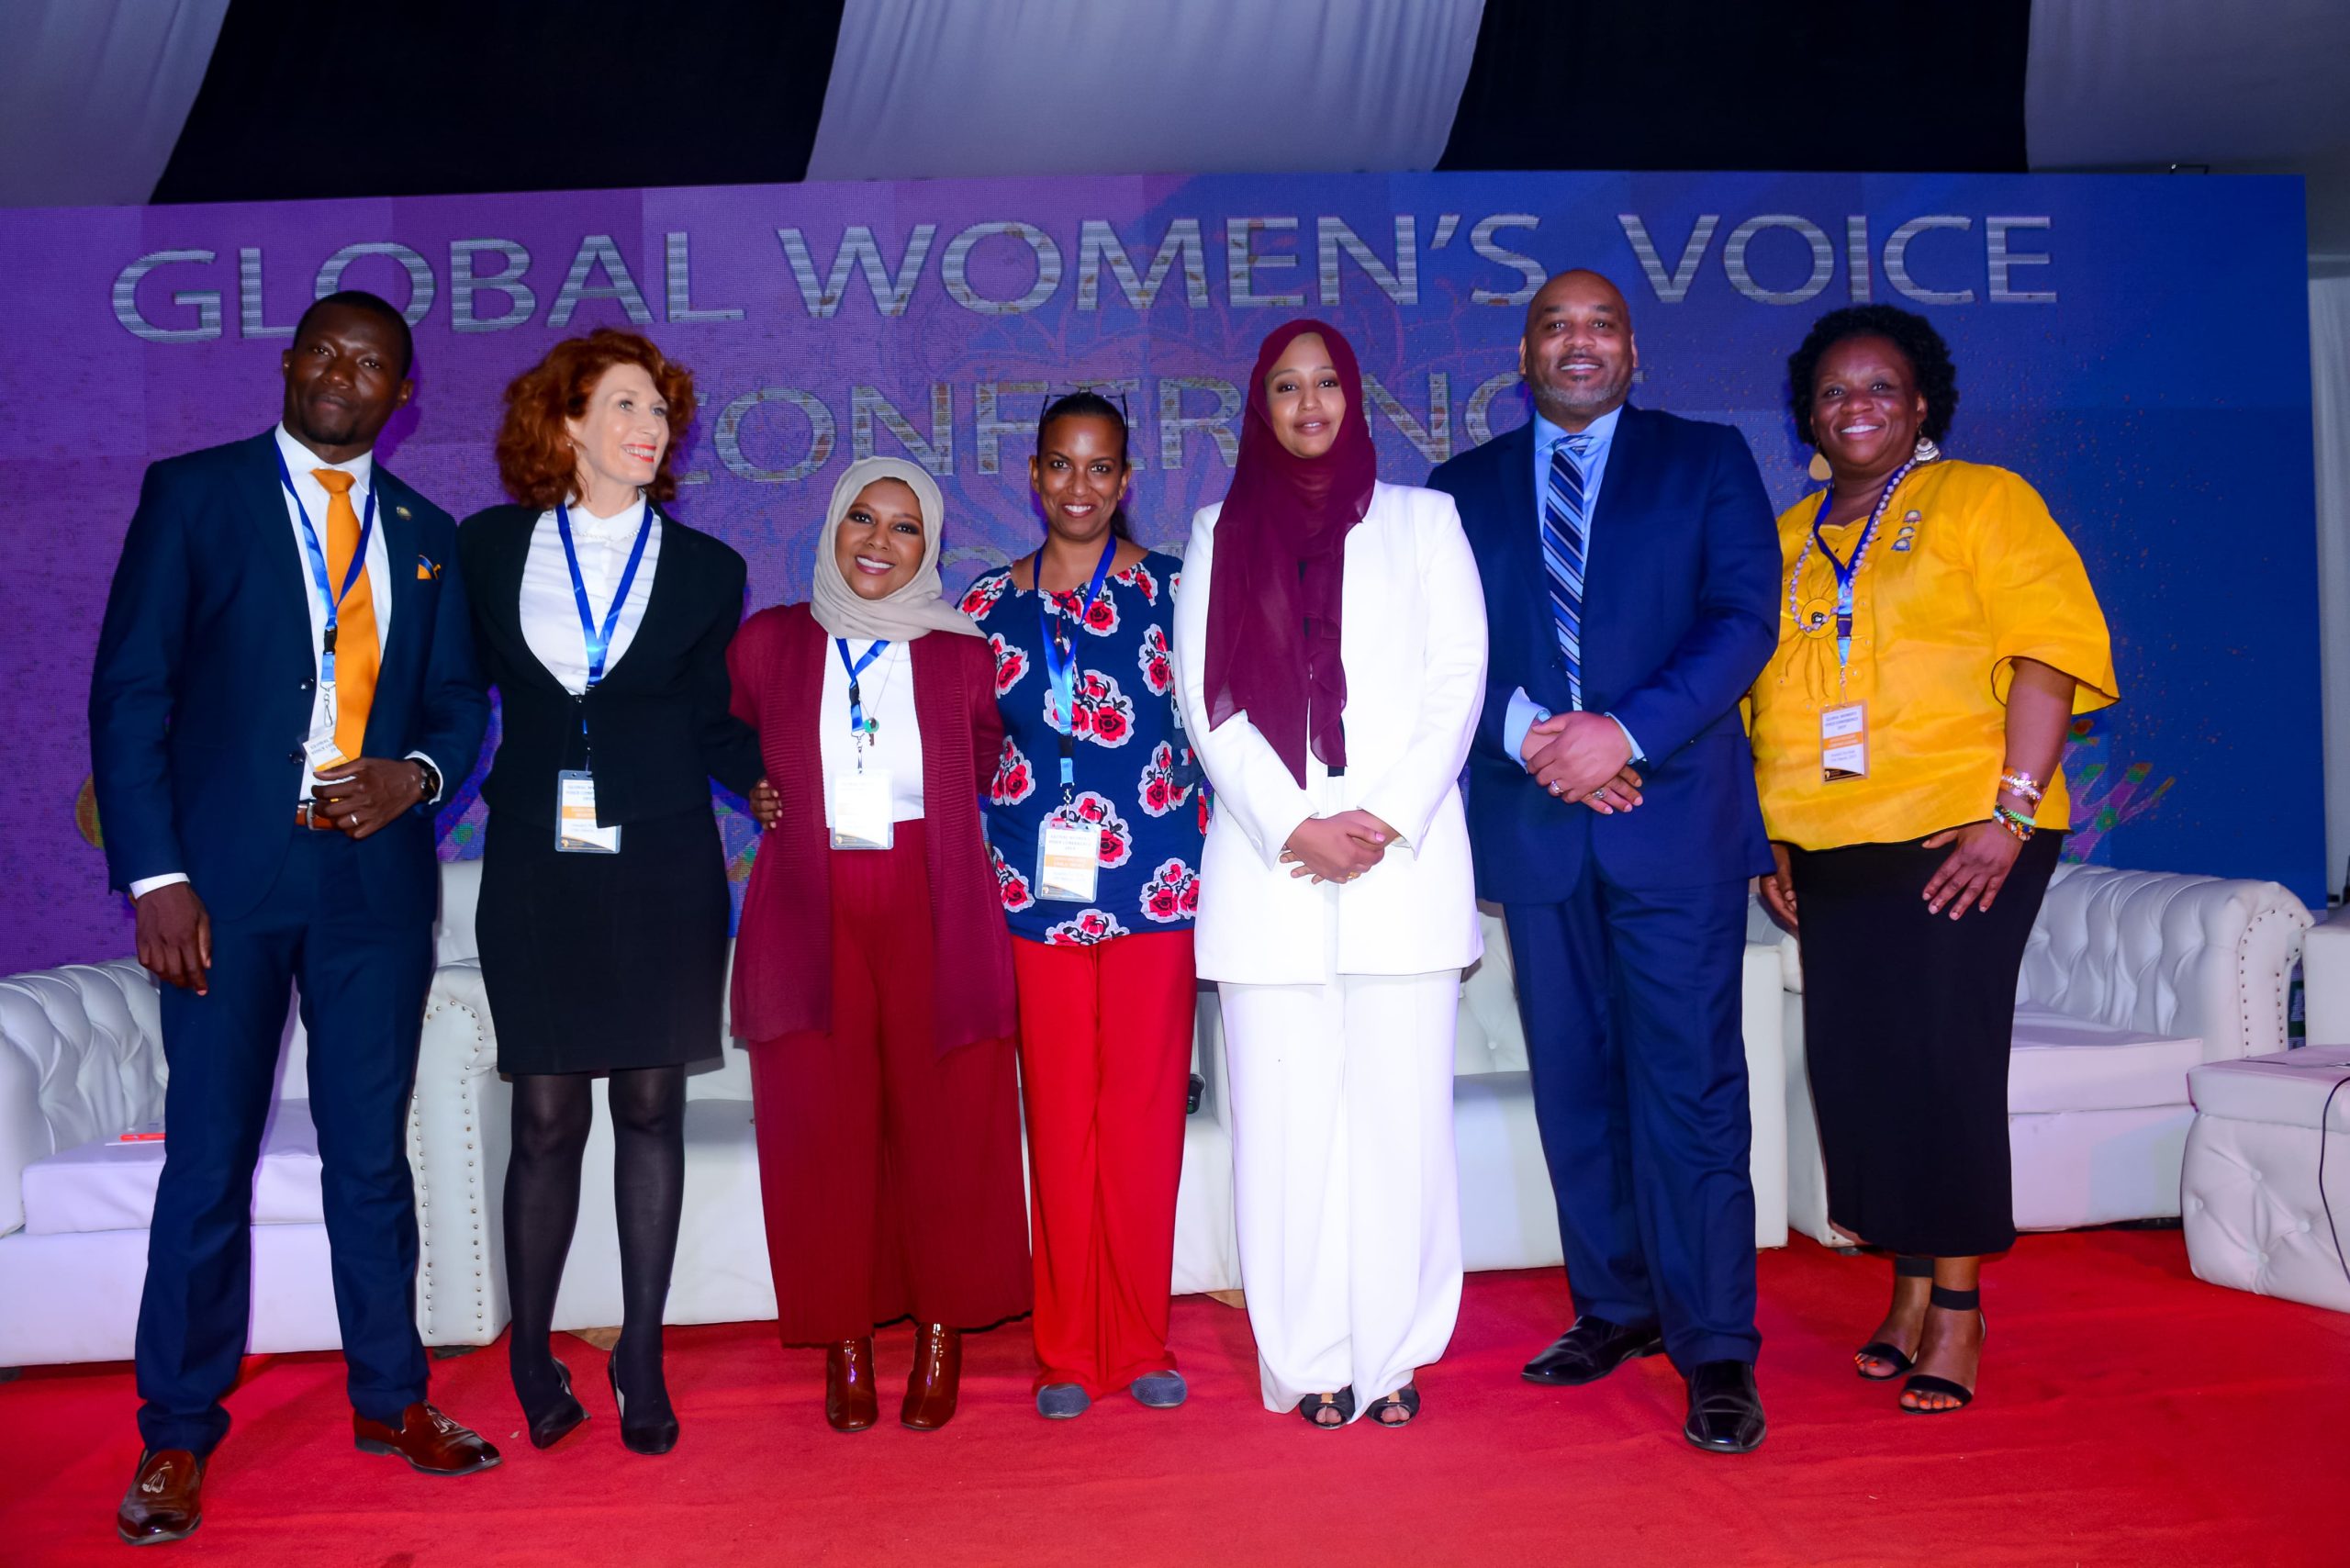 Pure-Pearl-foundation-Global-womens-voice-conference-2019-76-scaled-1